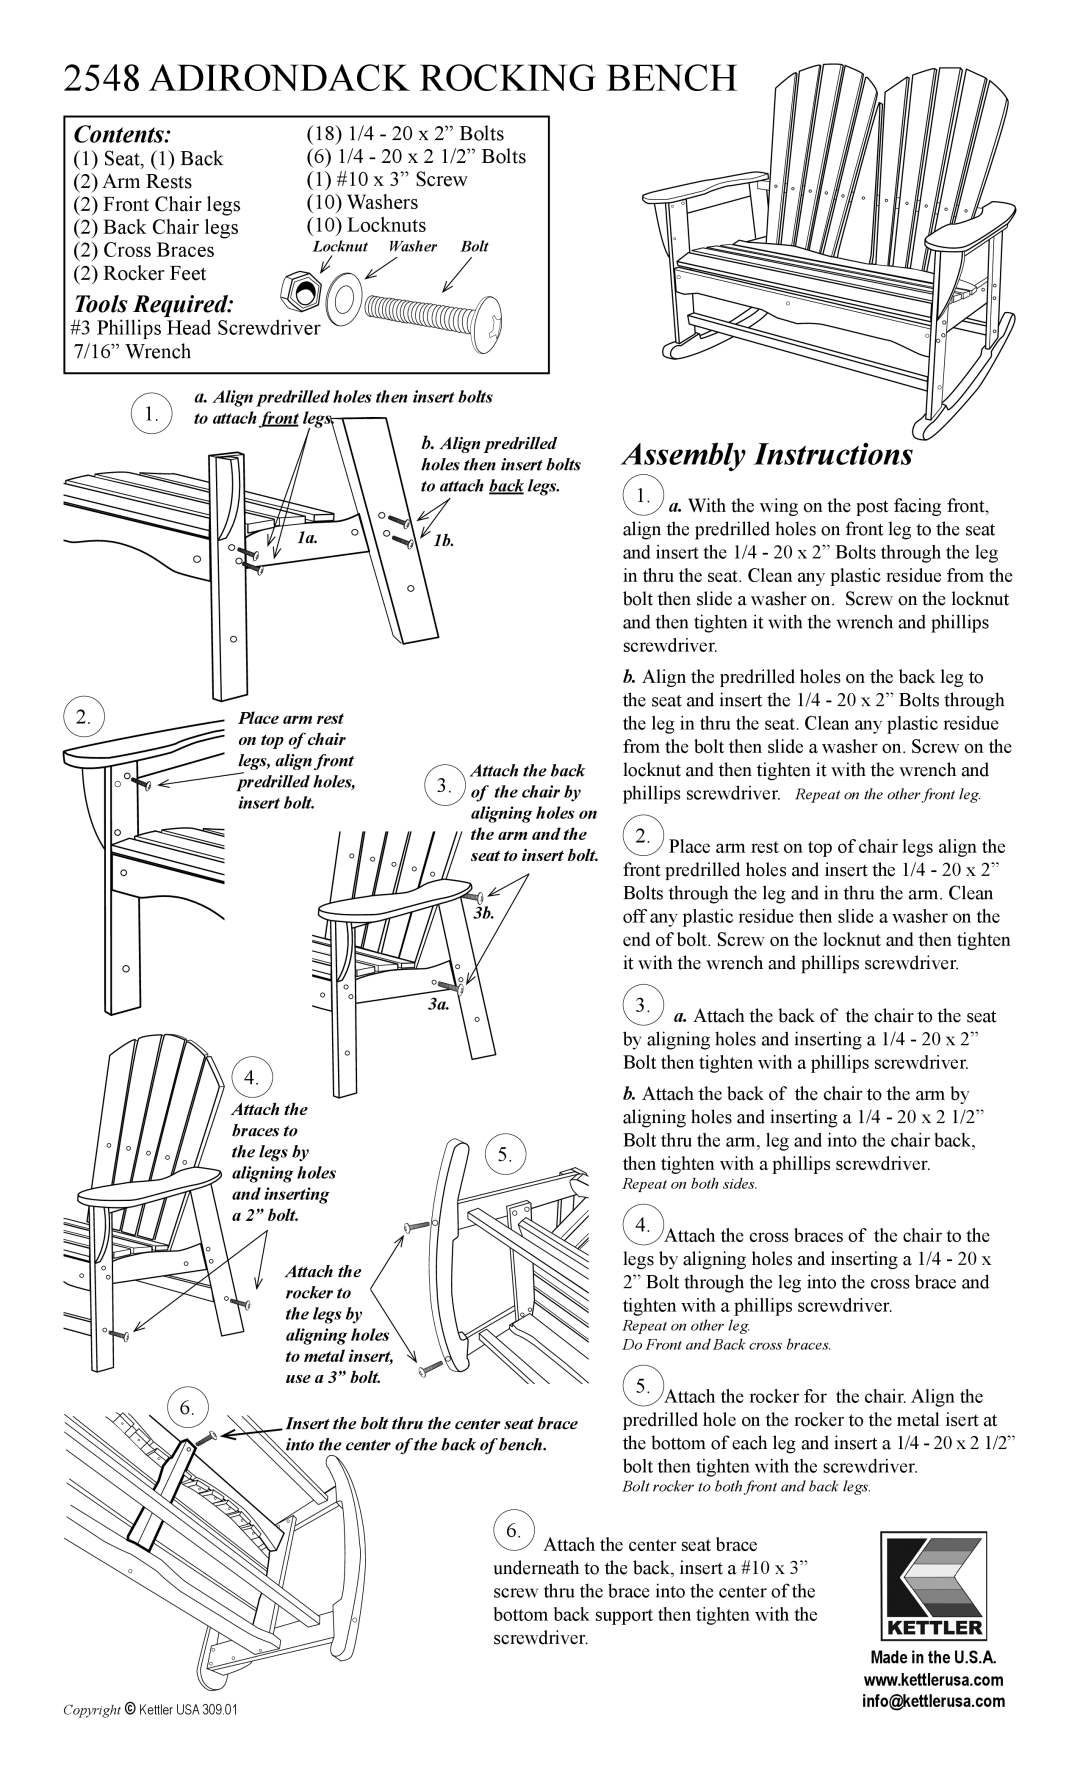 Kettler 2548 manual Adirondack Rocking Bench, Assembly Instructions, Contents, Tools Required 